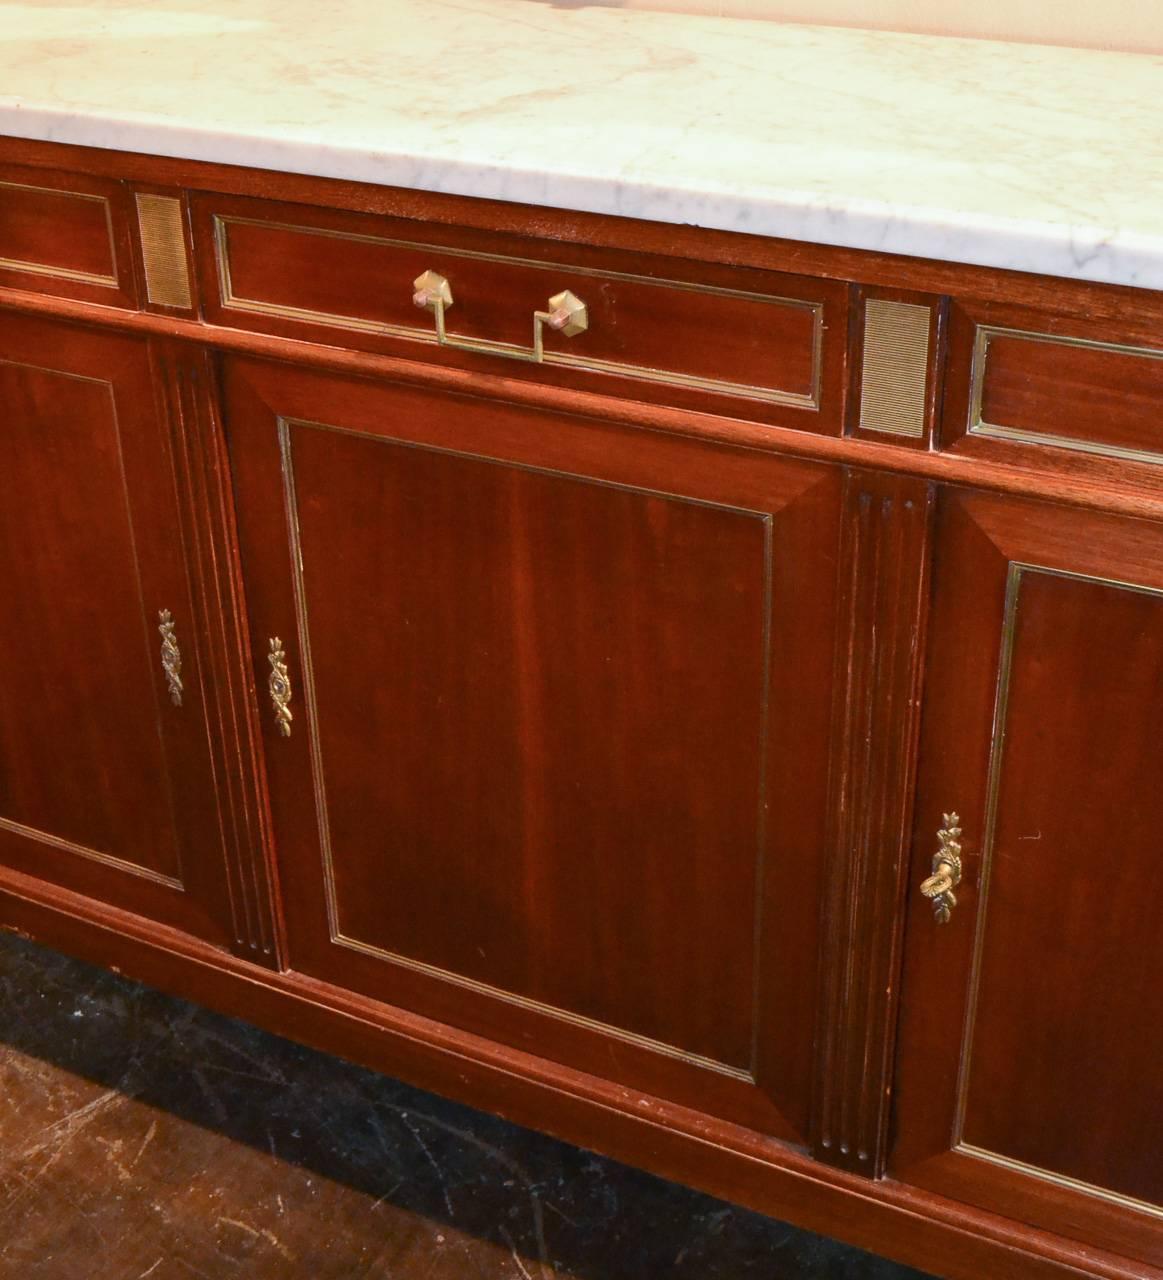 Sensational French, Jansen three-drawer over three-door mahogany server. Having bronze hardware and trim, beautiful Carrara marble top and resting on fluted tapered legs. Showcasing a lovely patina and clean lines that work in countless styles of